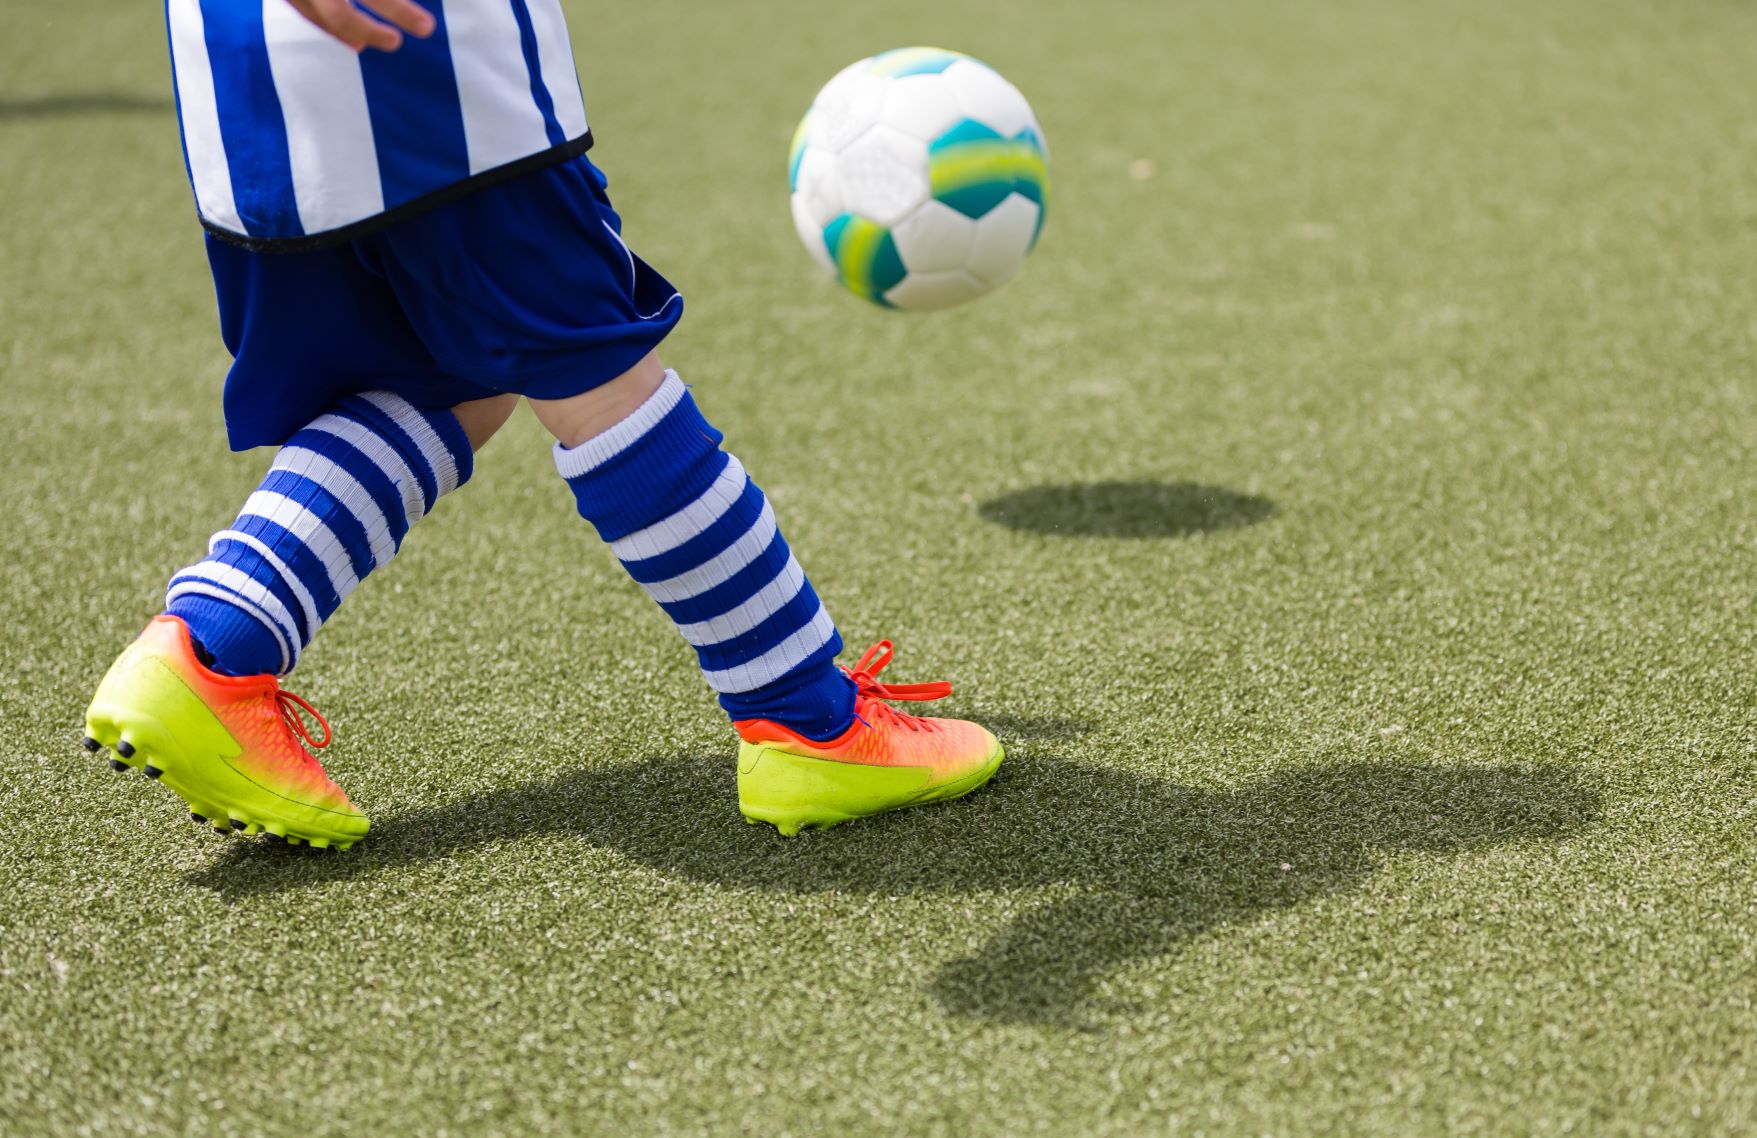 Shoes to use on artificial turf